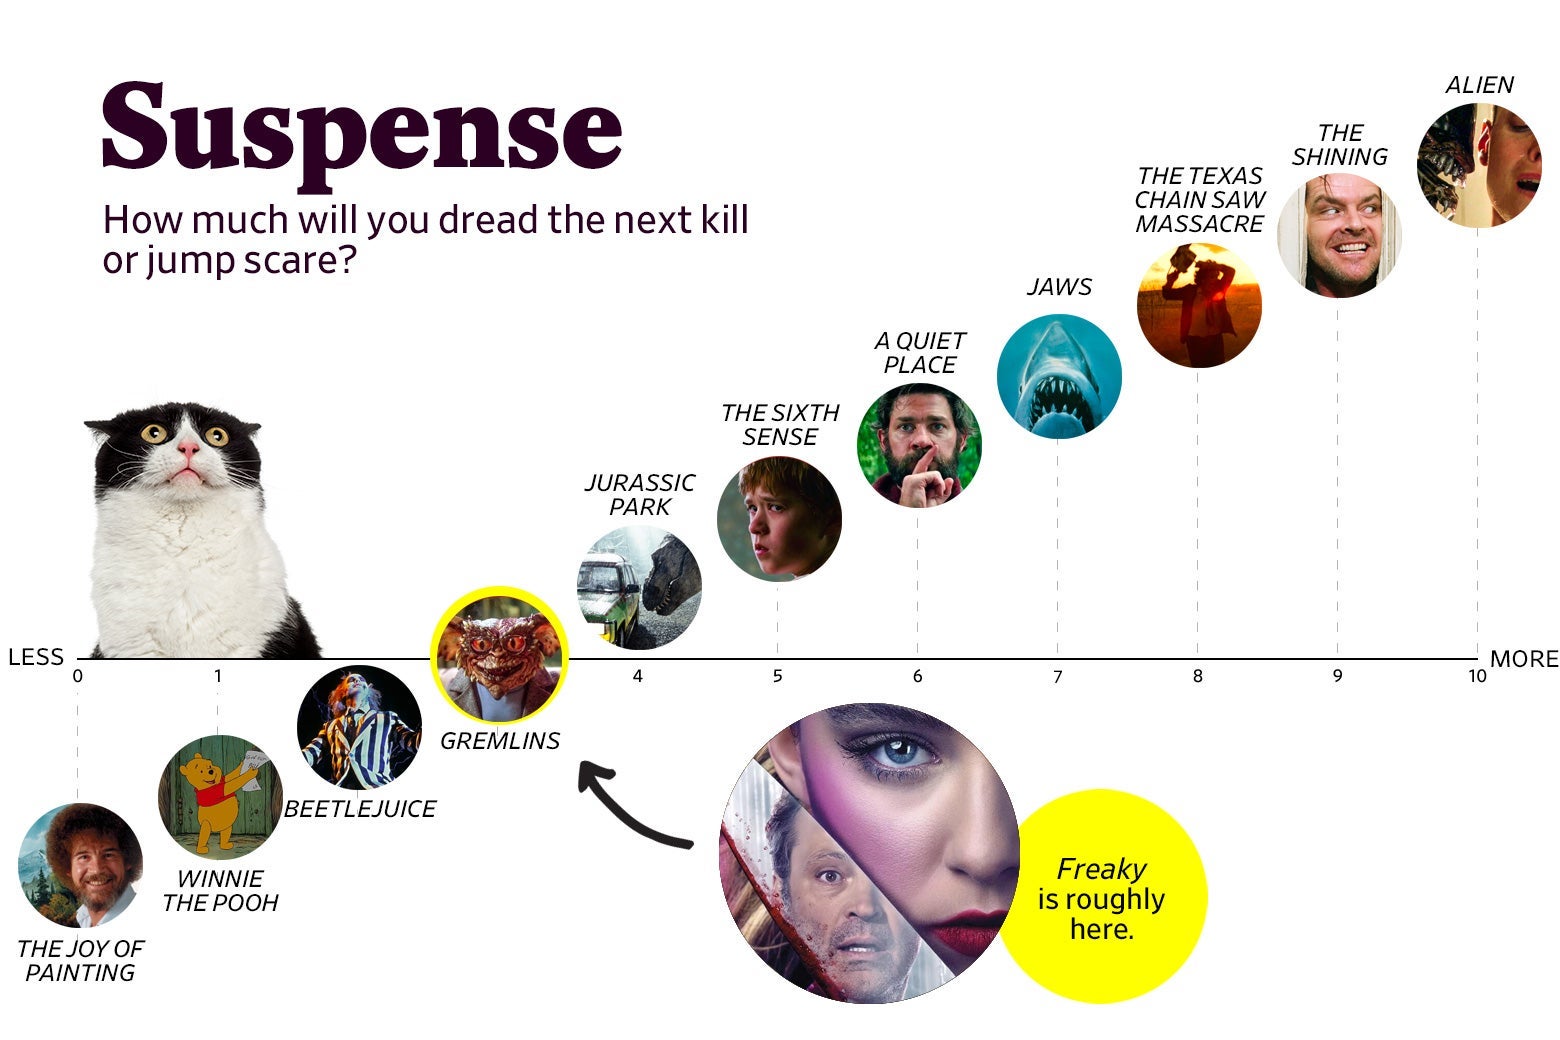 A chart titled “Suspense: How much will you dread the next kill or jump scare?” shows that Freaky ranks a 3 in suspense, roughly the same as Gremlins. The scale ranges from The Joy of Painting (0) to Alien (10).